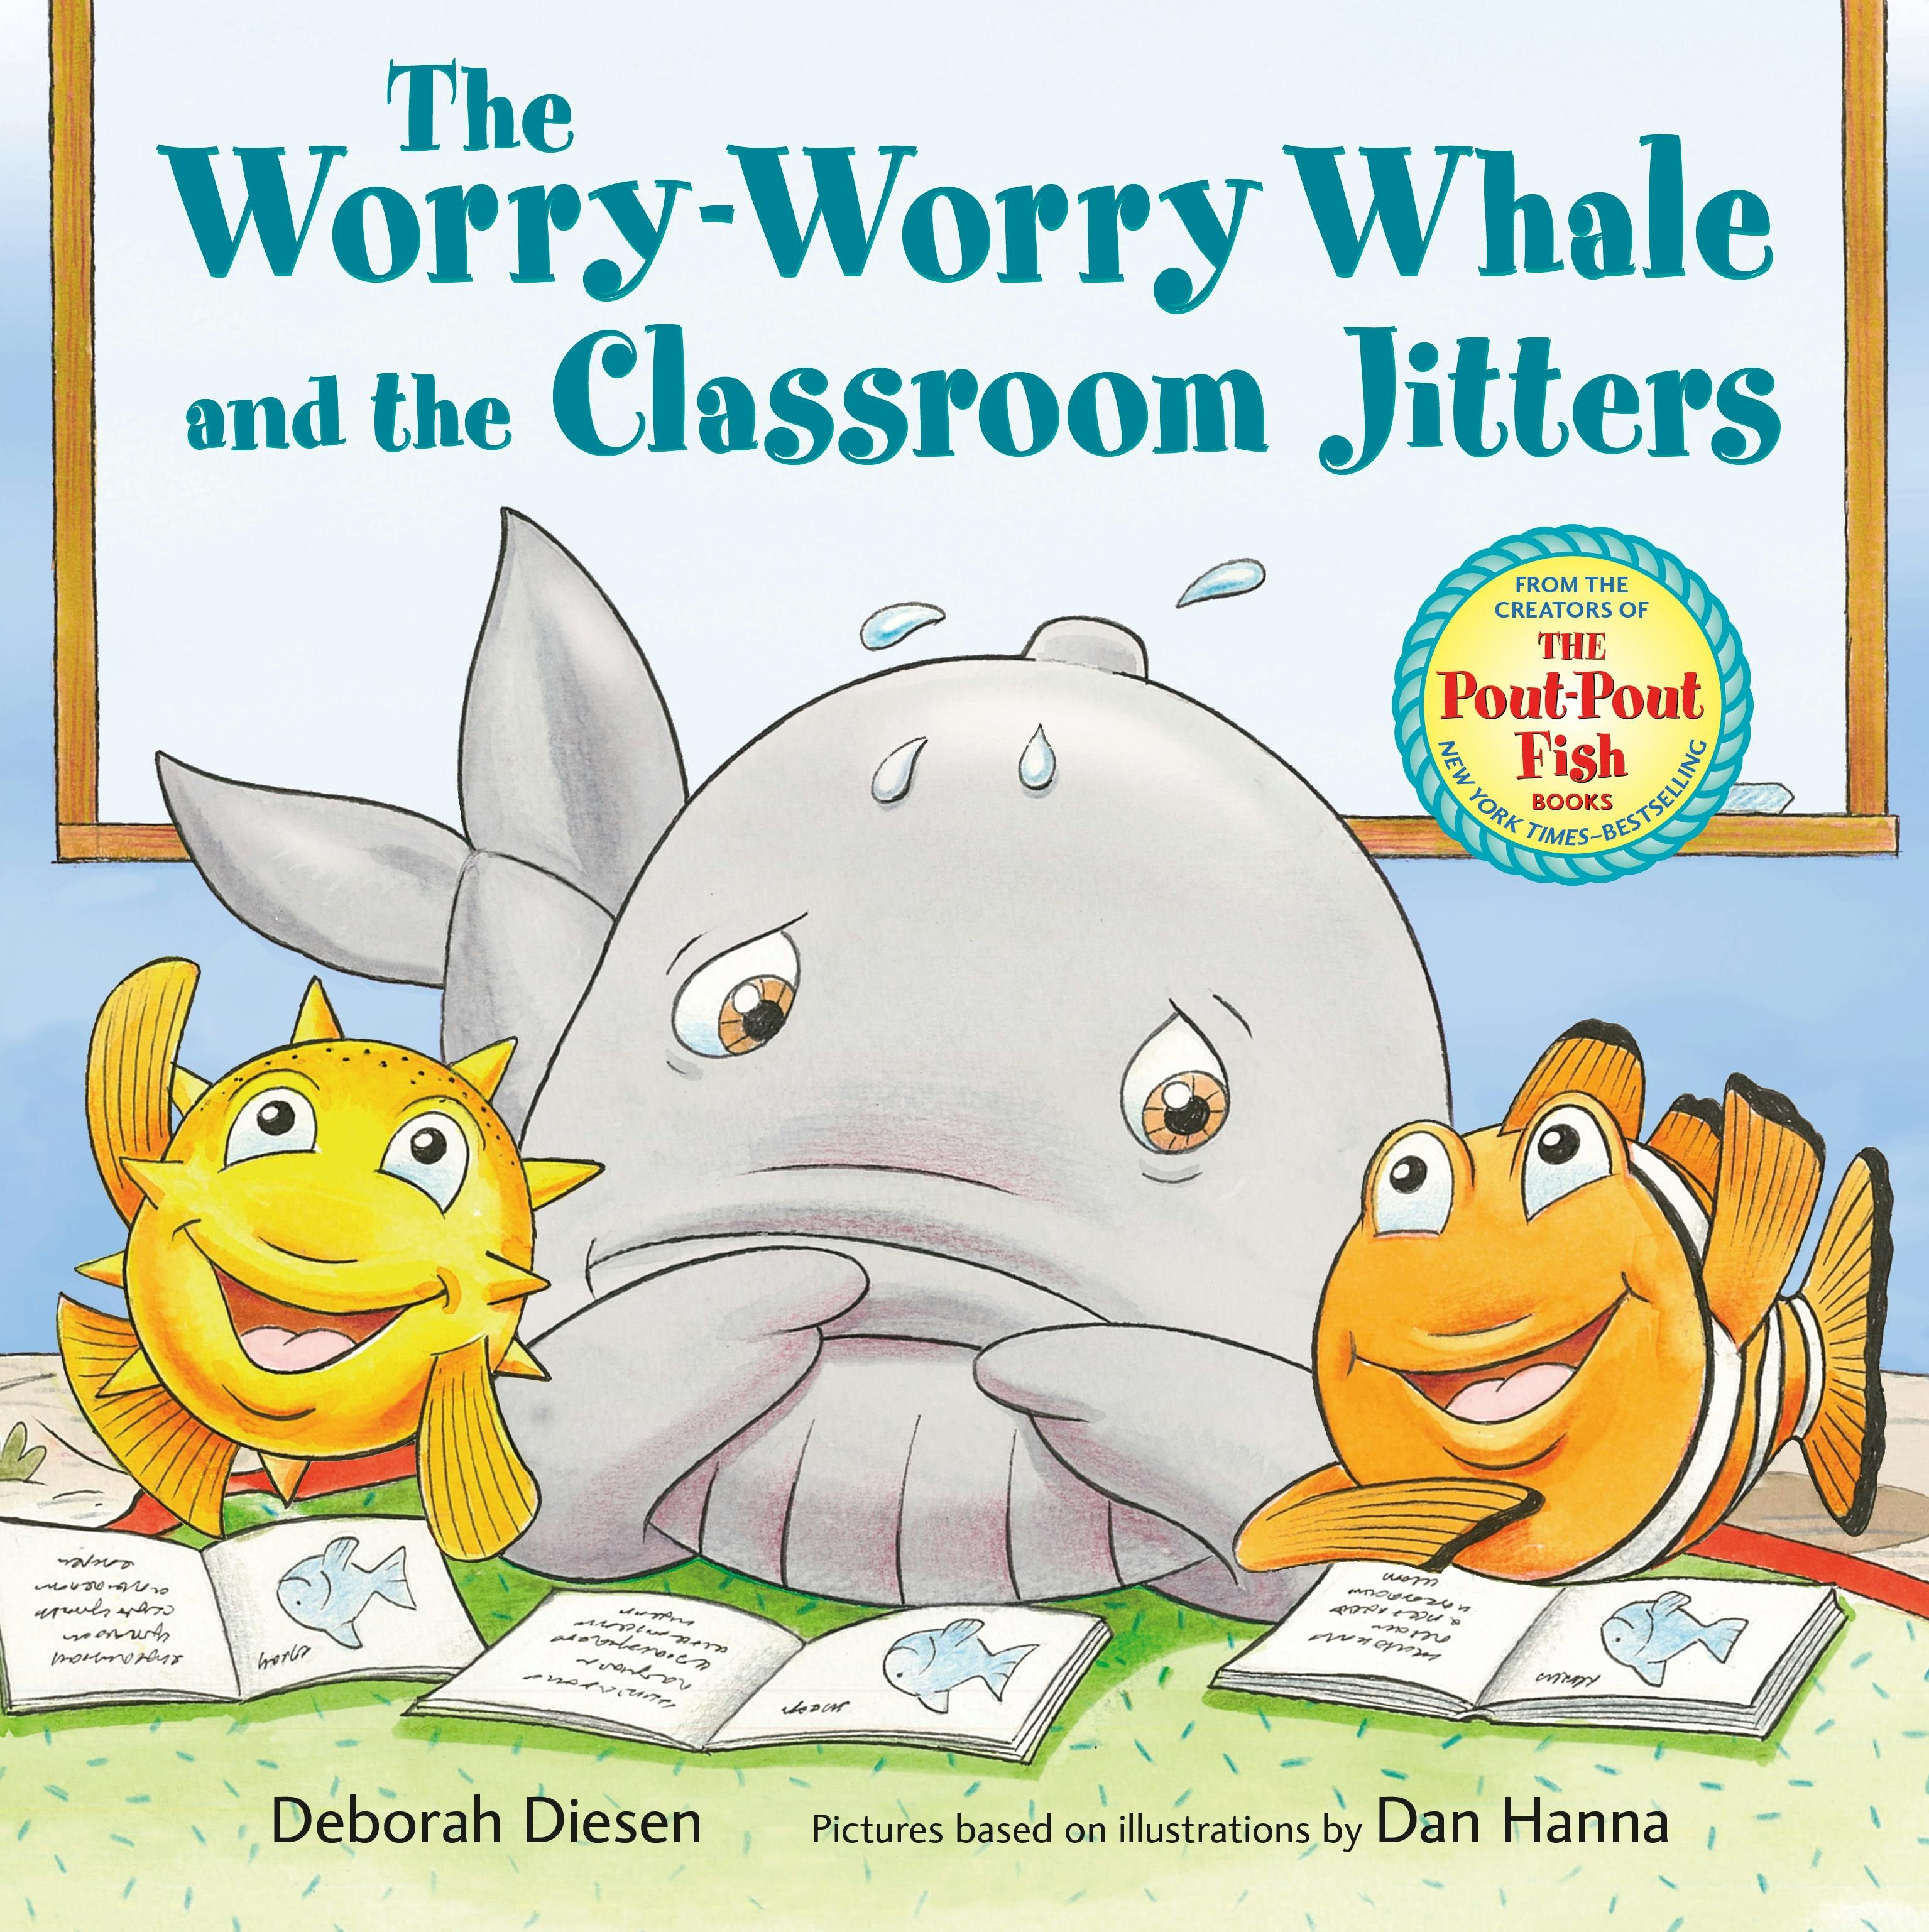 Image of The Worry-Worry Whale and the Classroom Jitters